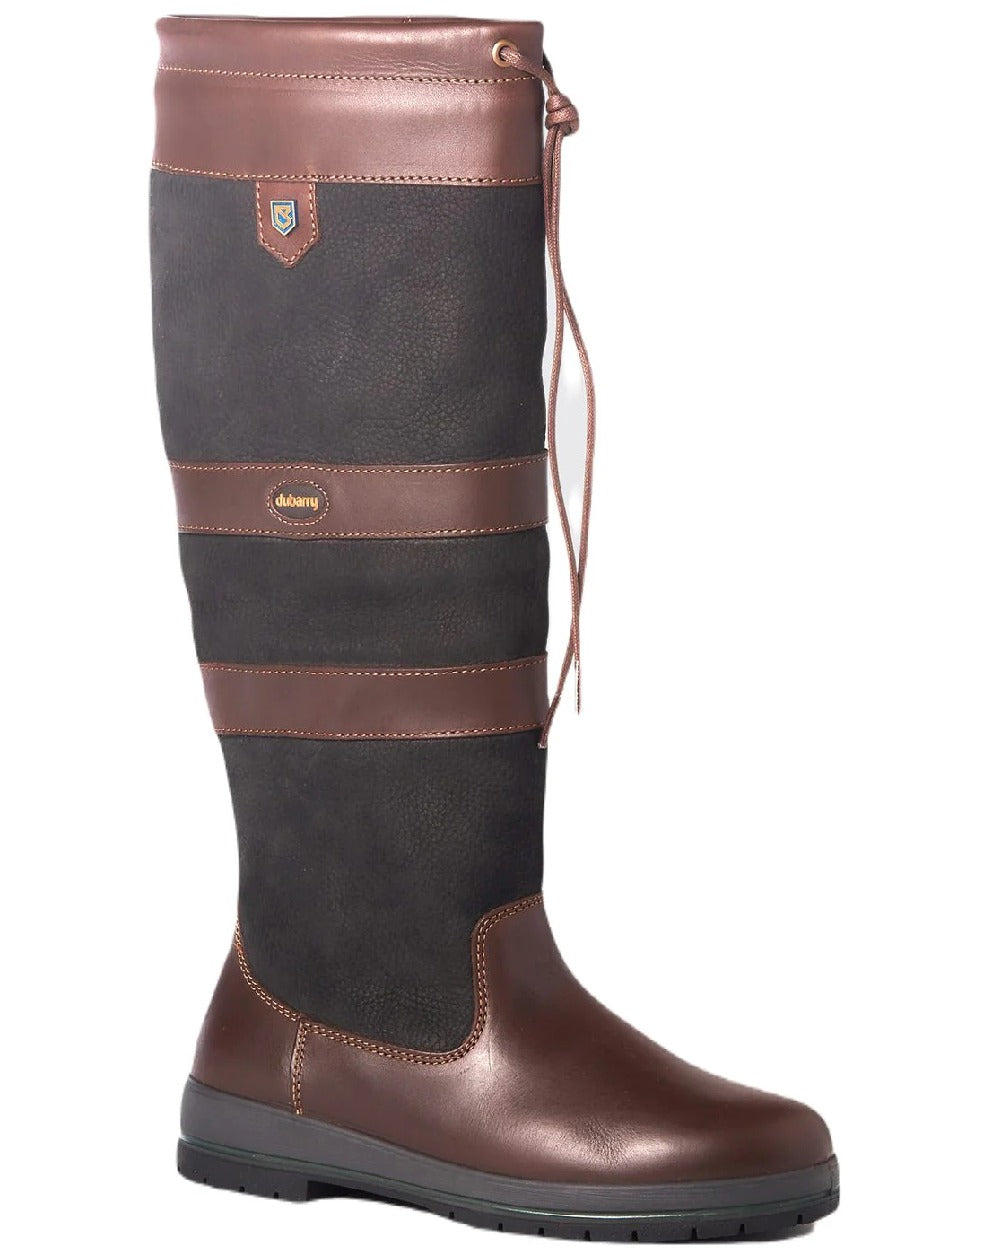 Dubarry Galway Country Boots in Black Brown 